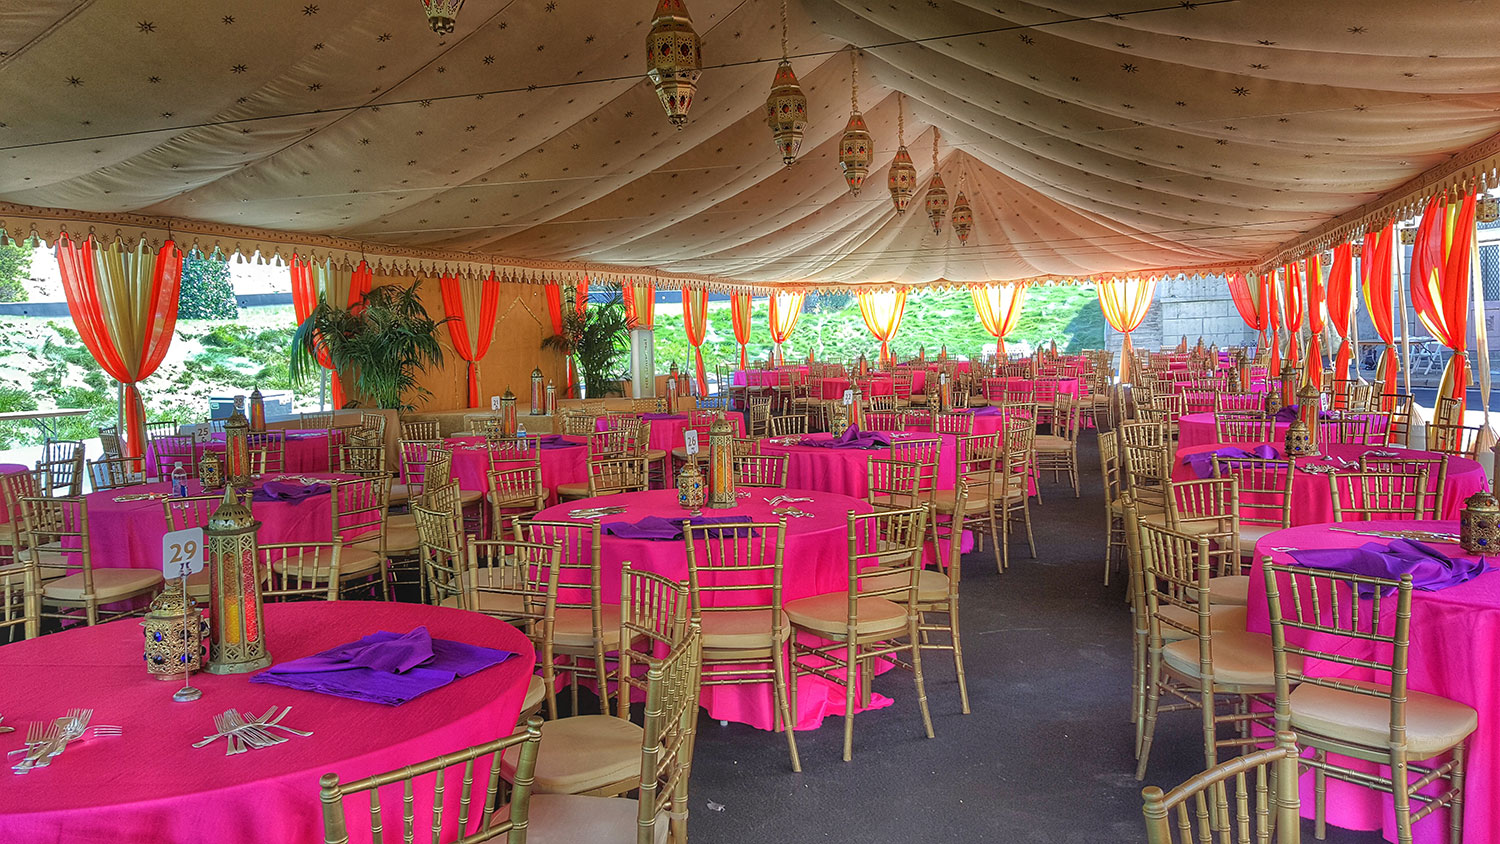 raj-tents-frame-tent-linings-colorful-banquet-hot-pink.jpg